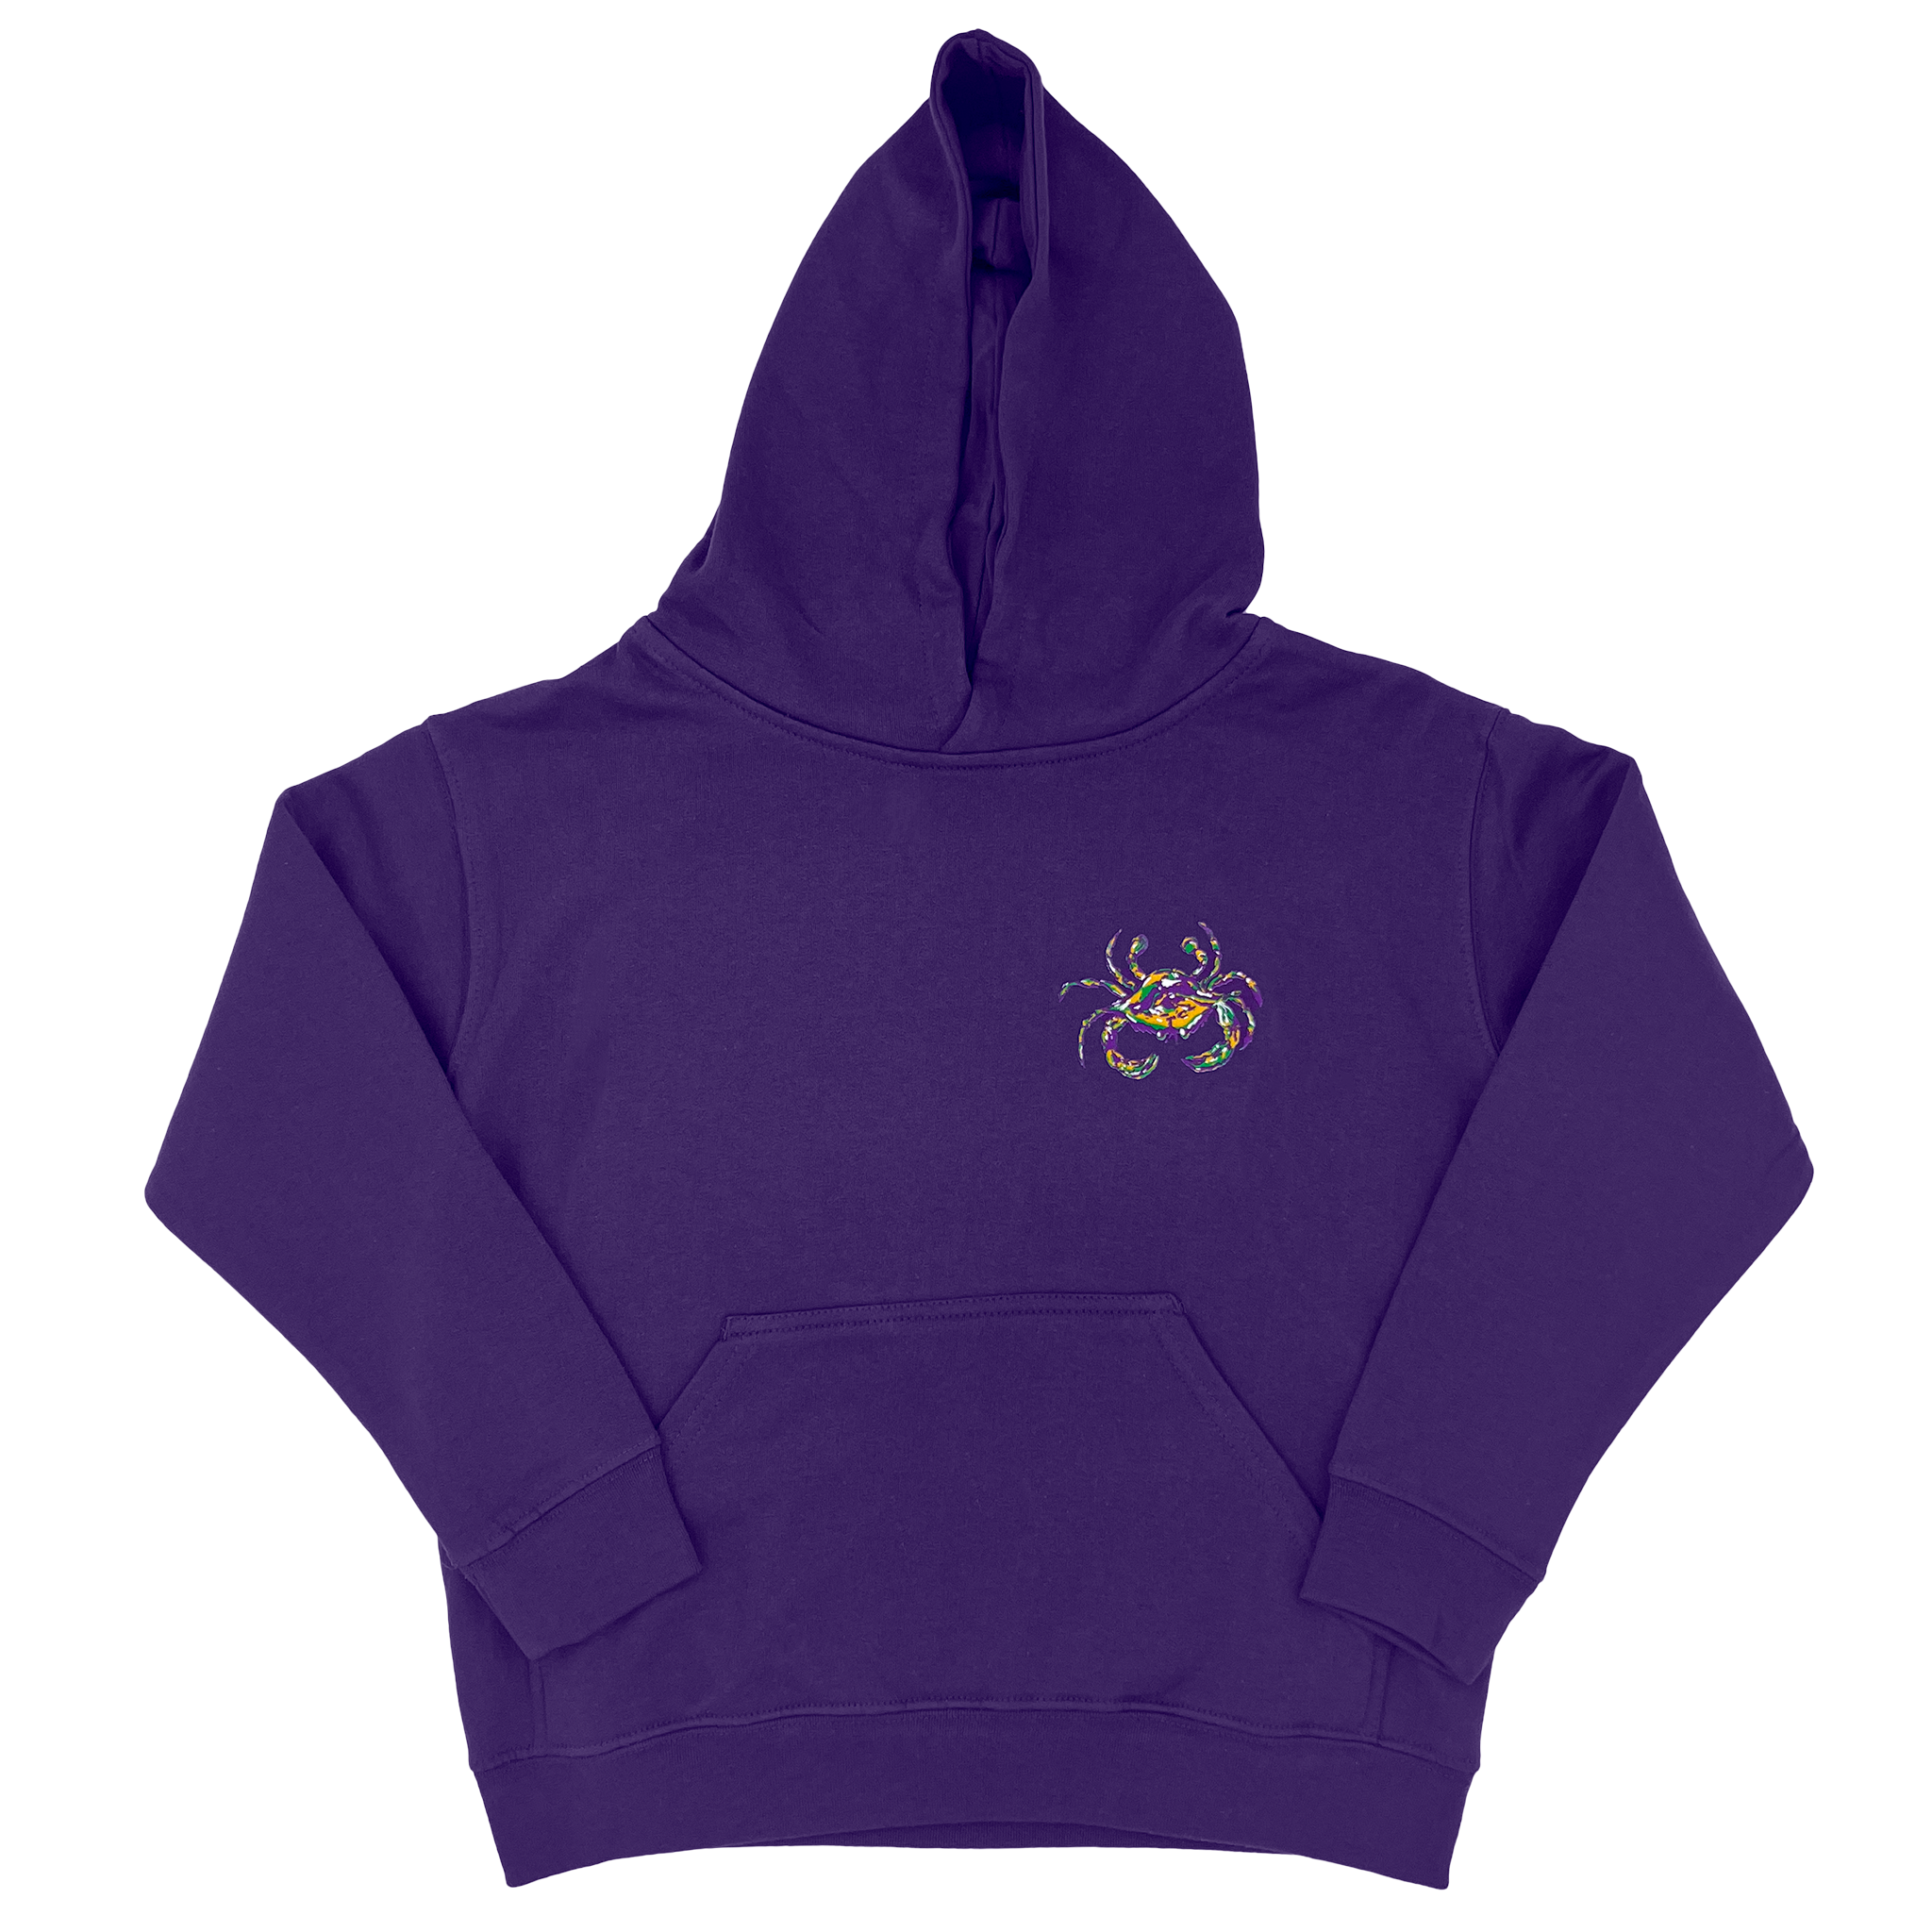 A kids purple Mardi Gras sweatshirt with a hood and a Mardi Gras Crab on the left chest.  